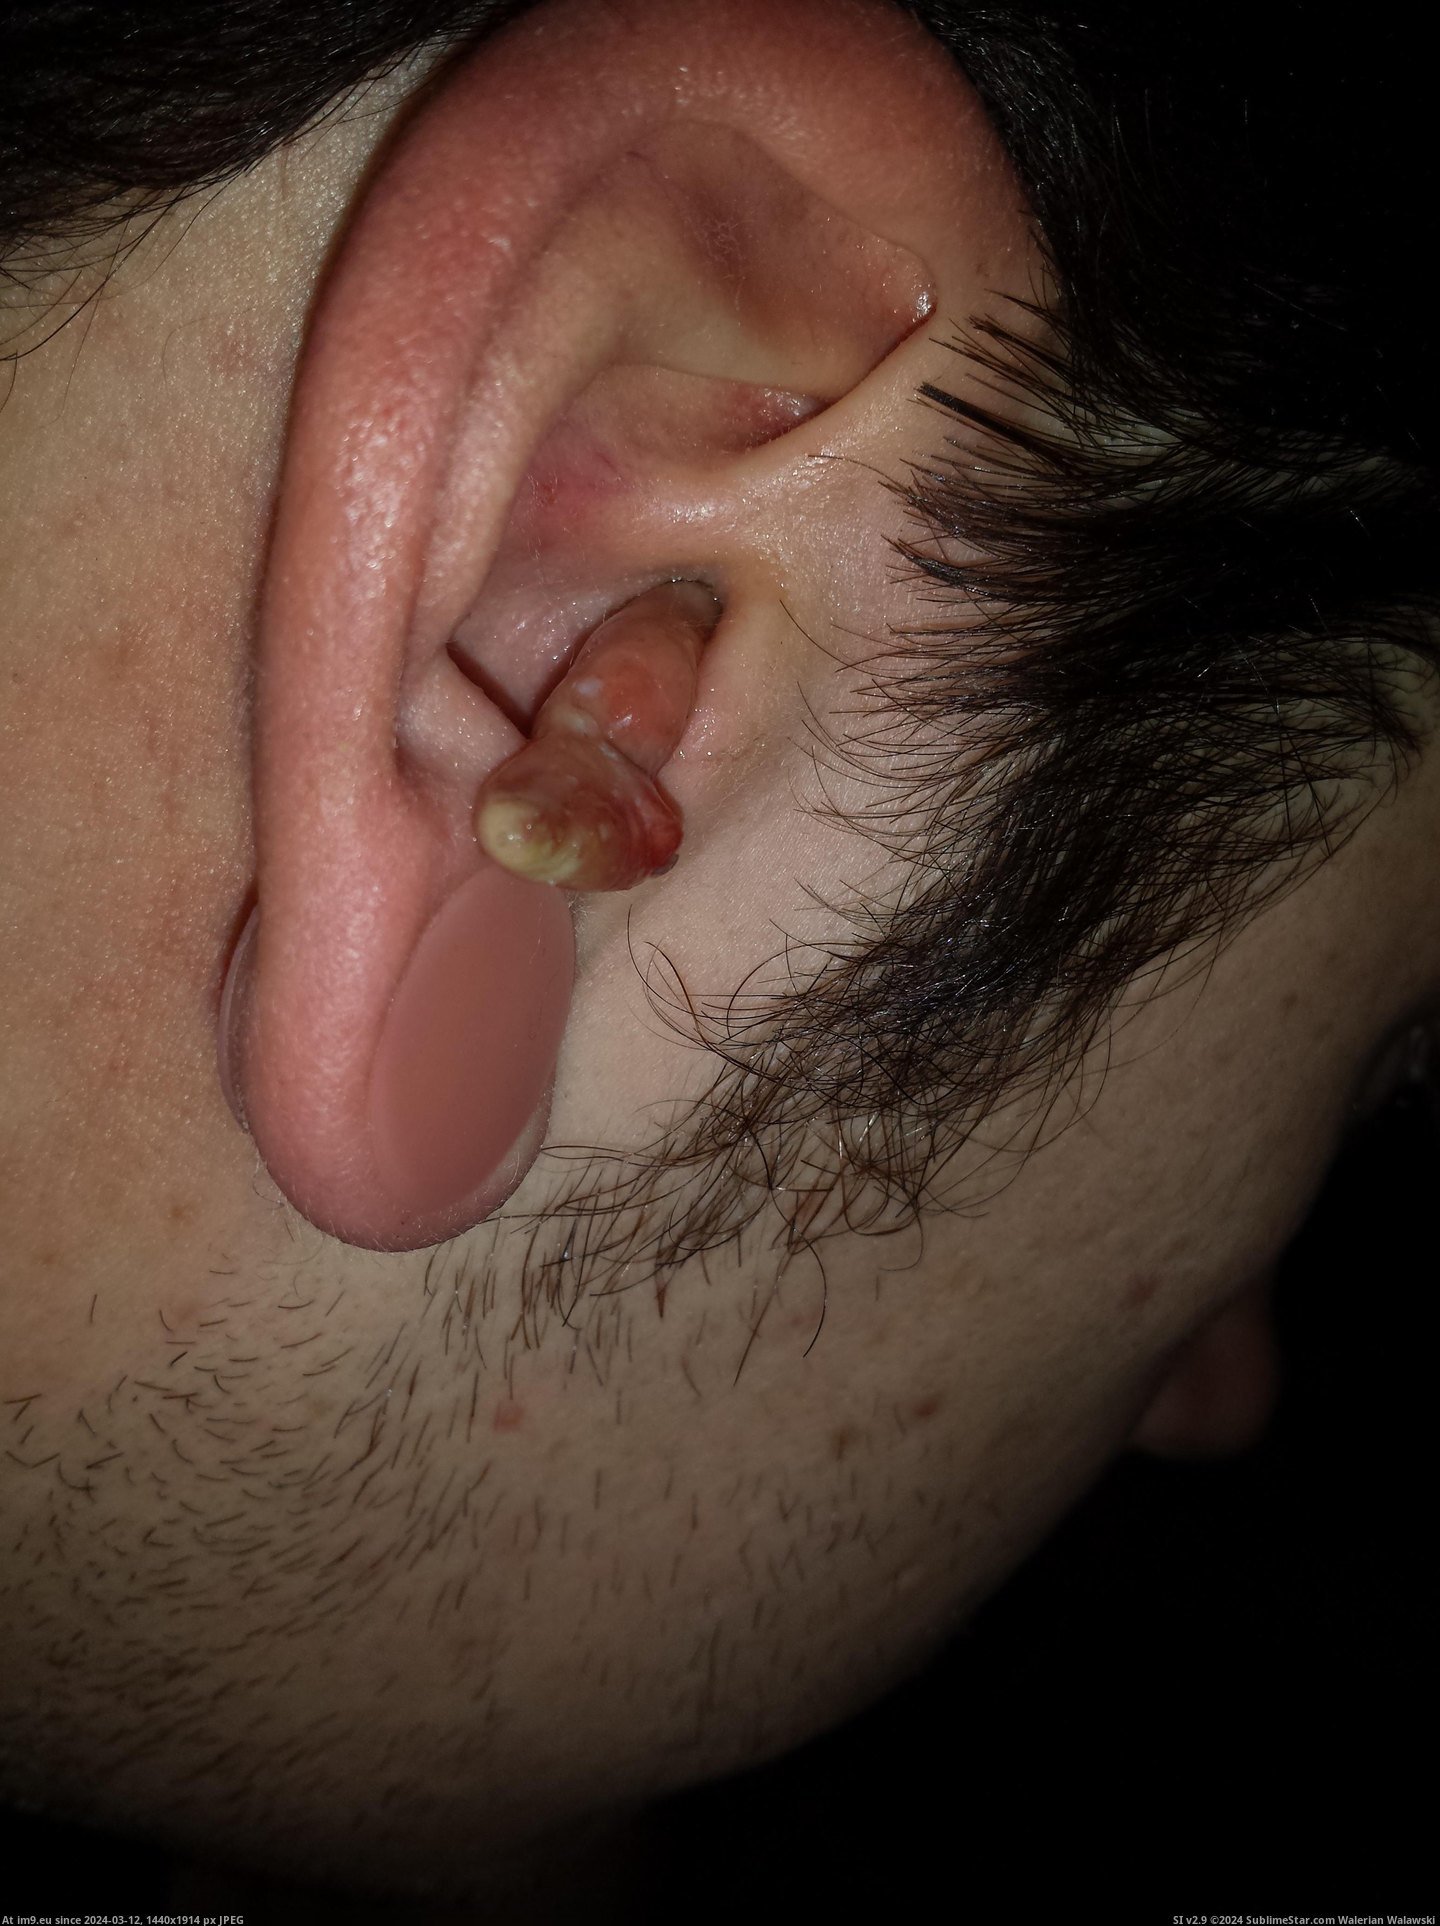 #Wtf #Ear #Infection #Crazy [Wtf] My crazy ear infection 11 Pic. (Image of album My r/WTF favs))